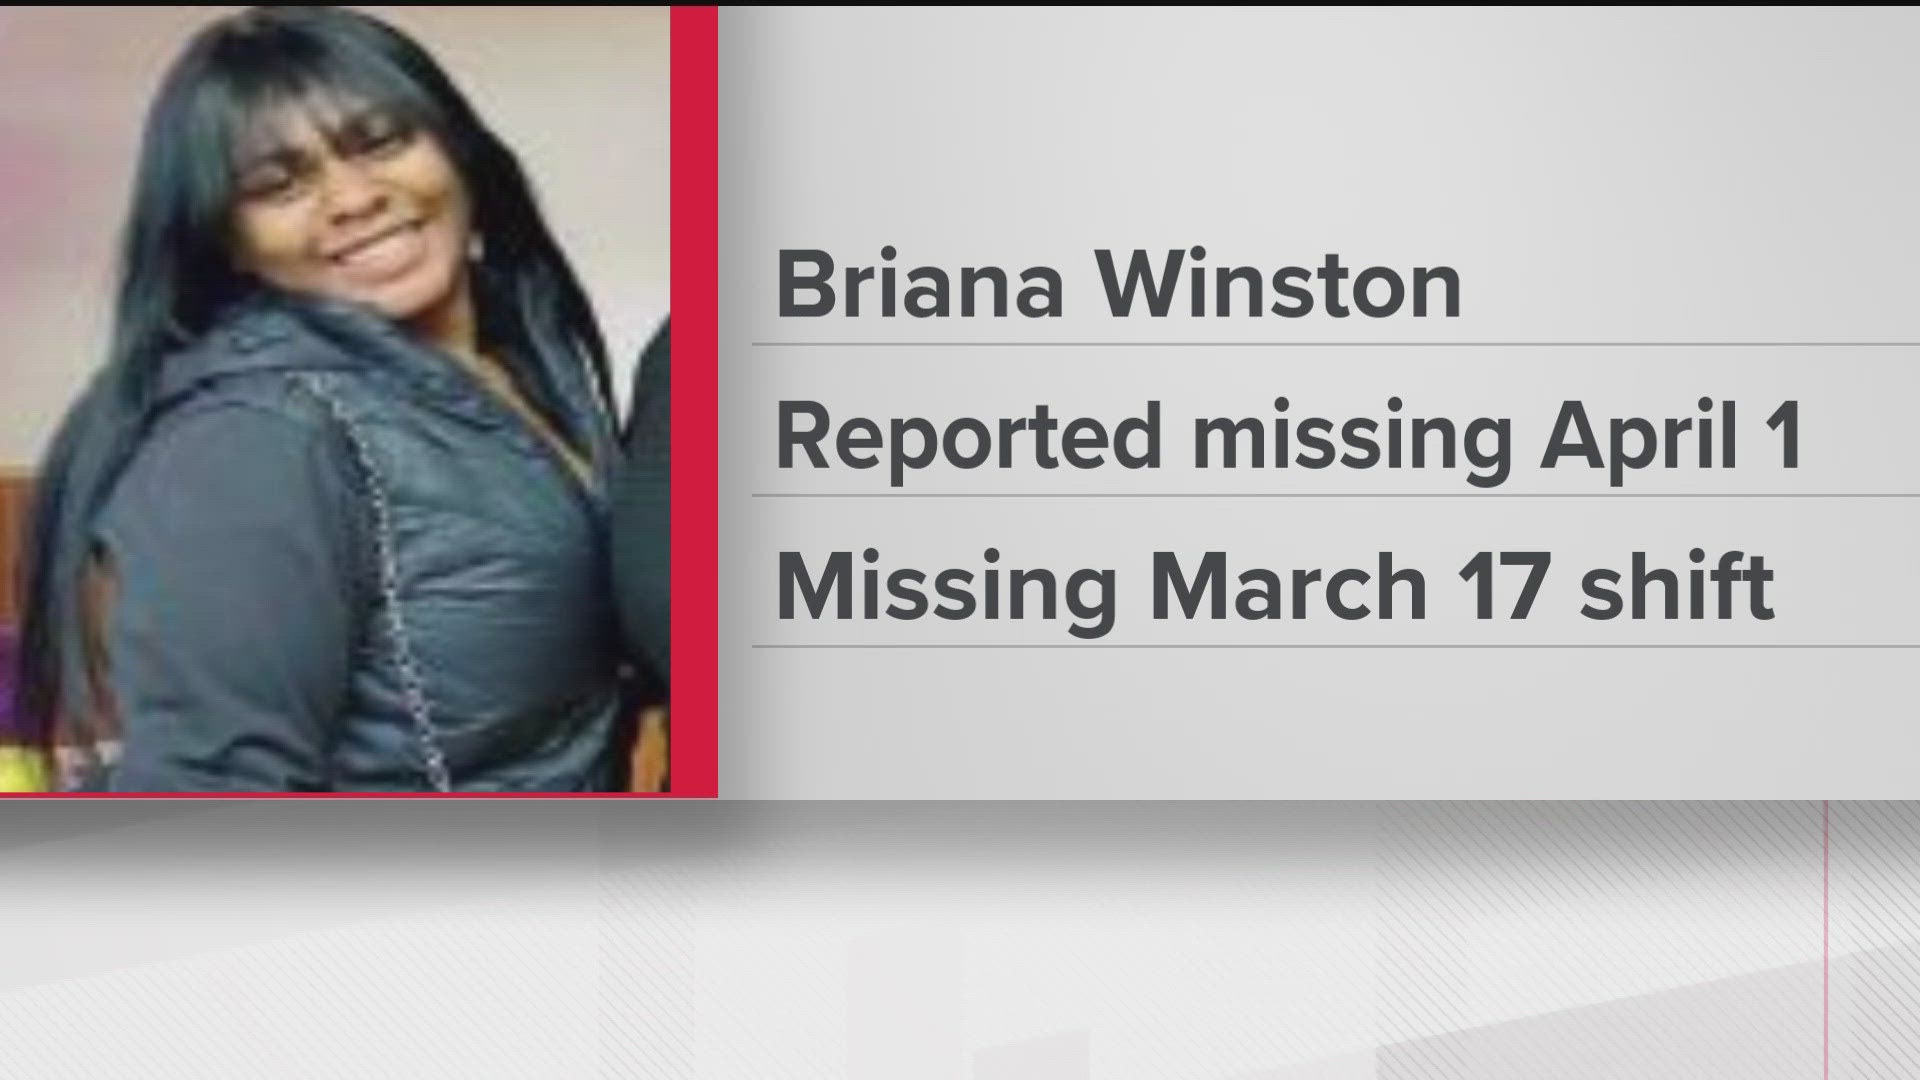 The family of Brianna Wintson reported her missing on April 1.